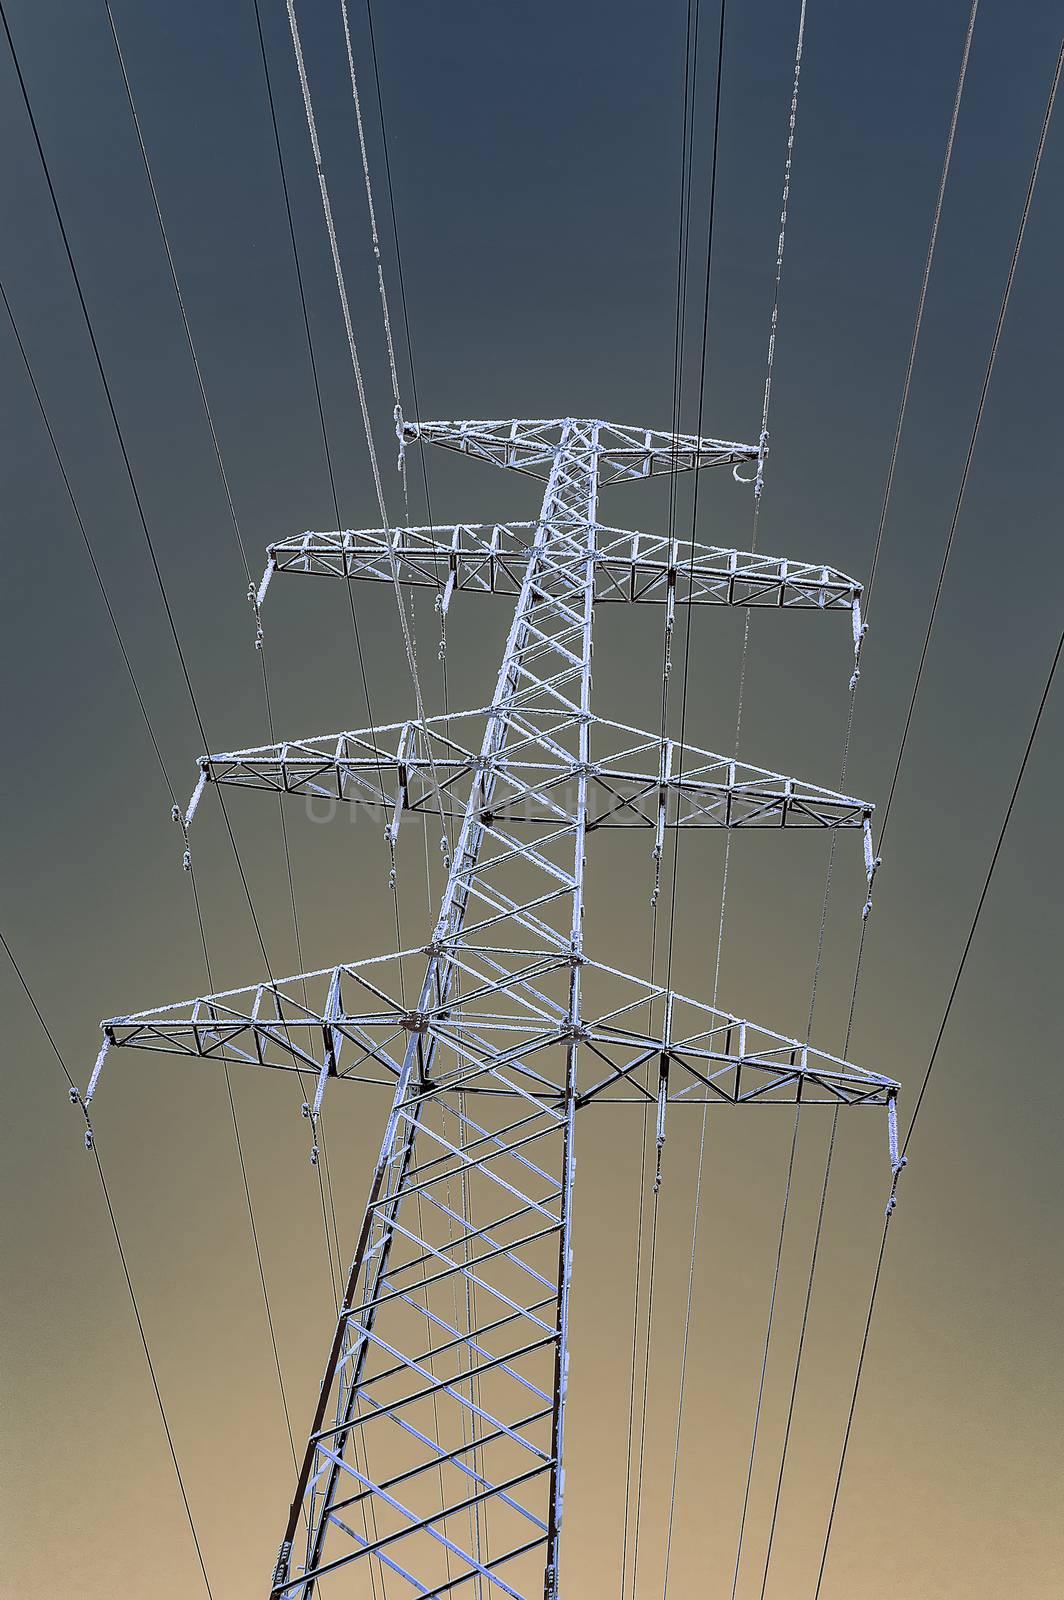 The support of the high voltage line in winter. View from below. Gradient sky. Vertical image.